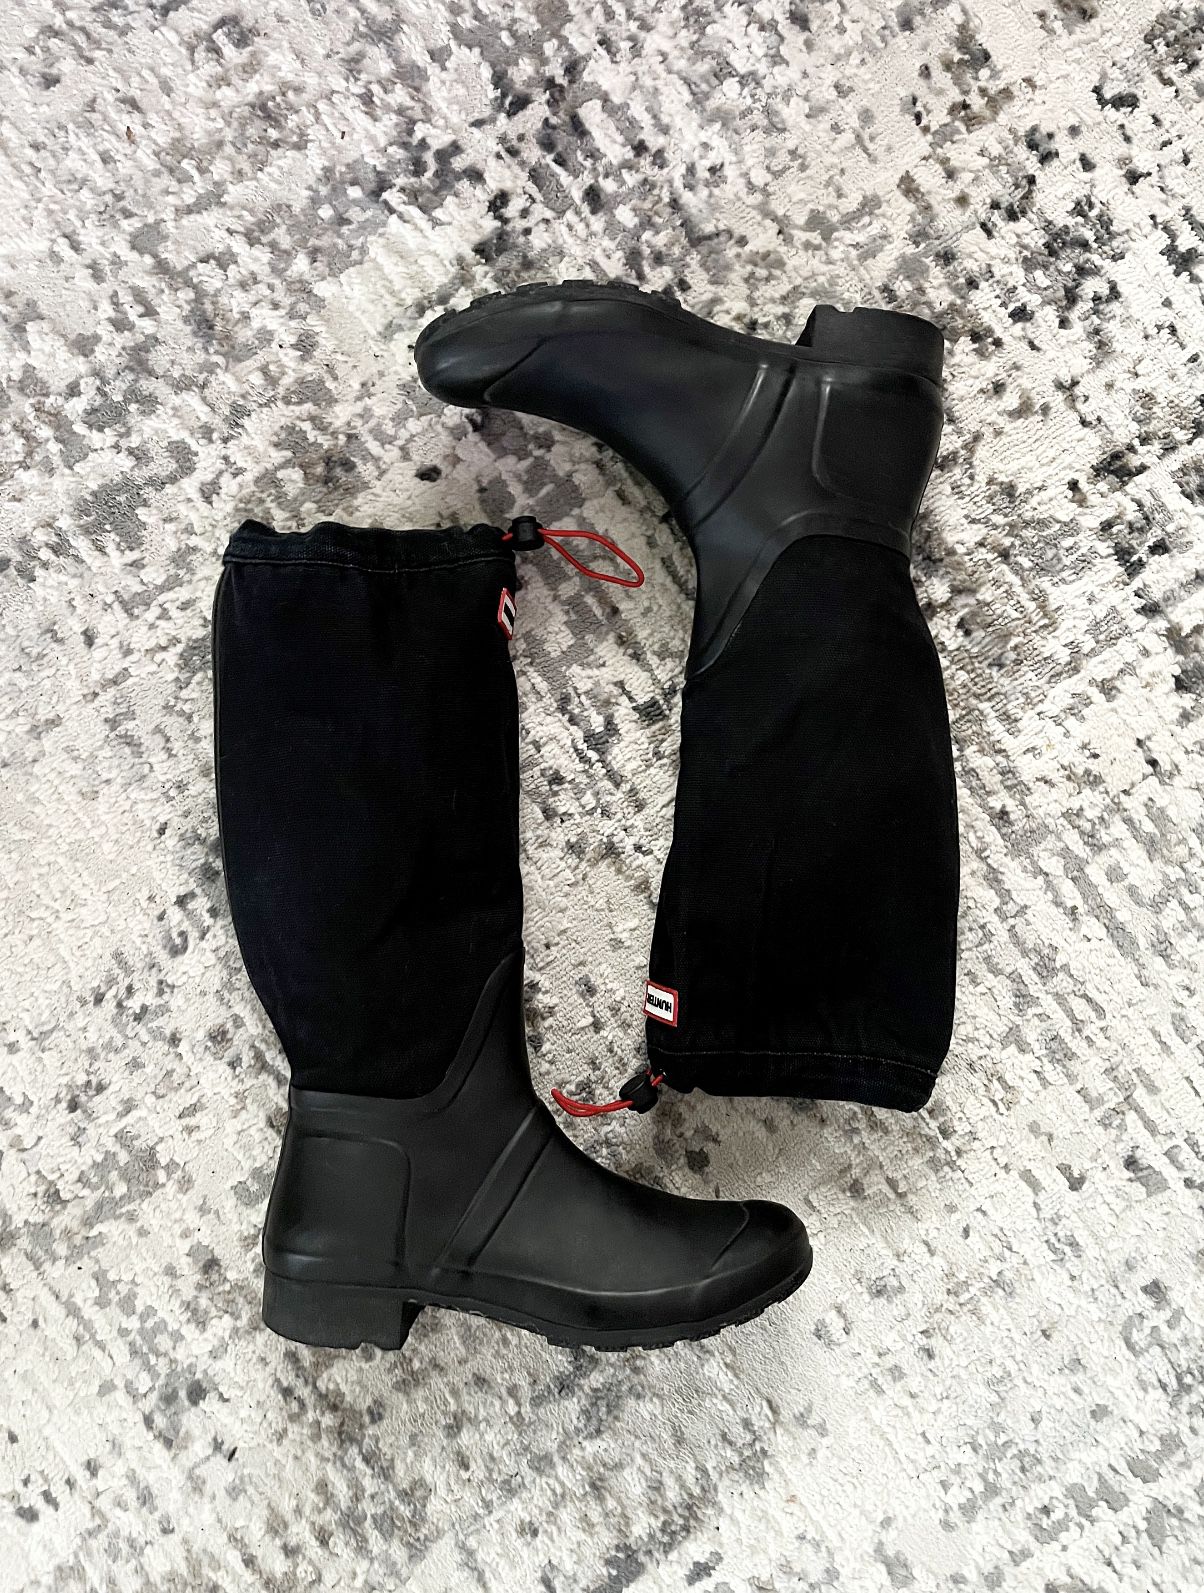 Women’s Hunter black denim / rubber rain or snow boots. Size 10 Retail $190 Good condition! With draw string closures. 